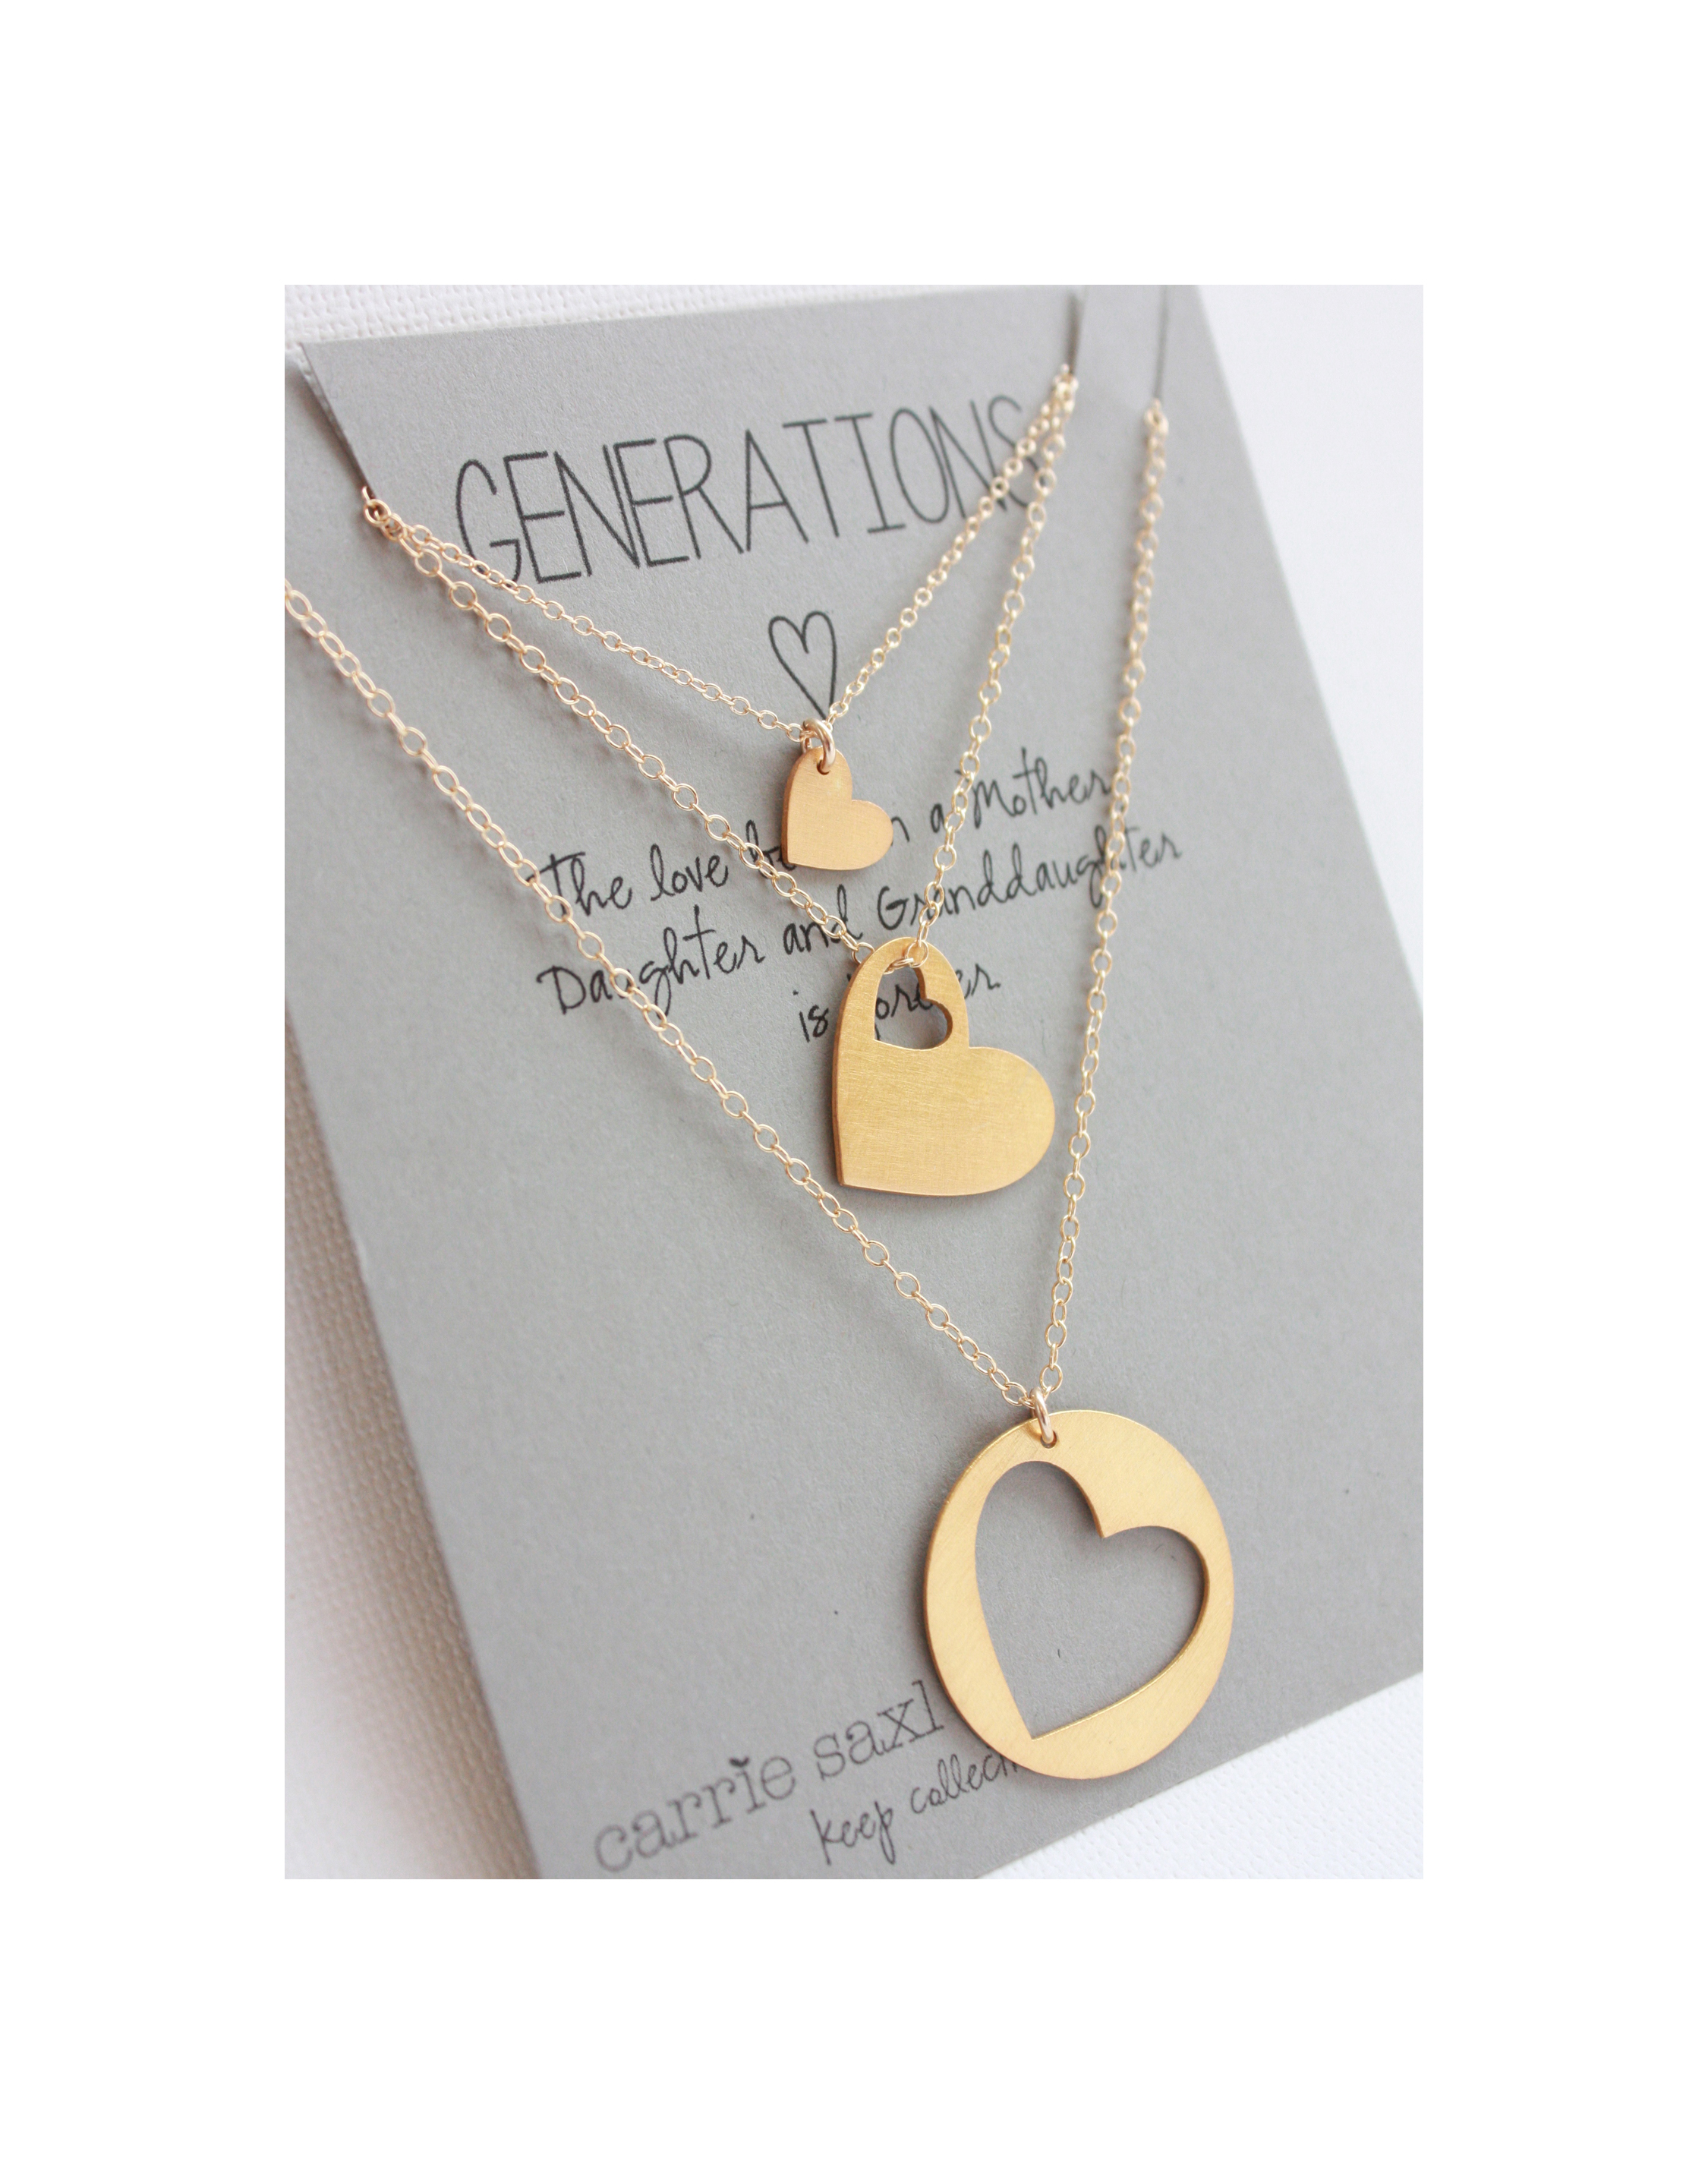 Generations Necklace for Grandma – BeWishedGifts